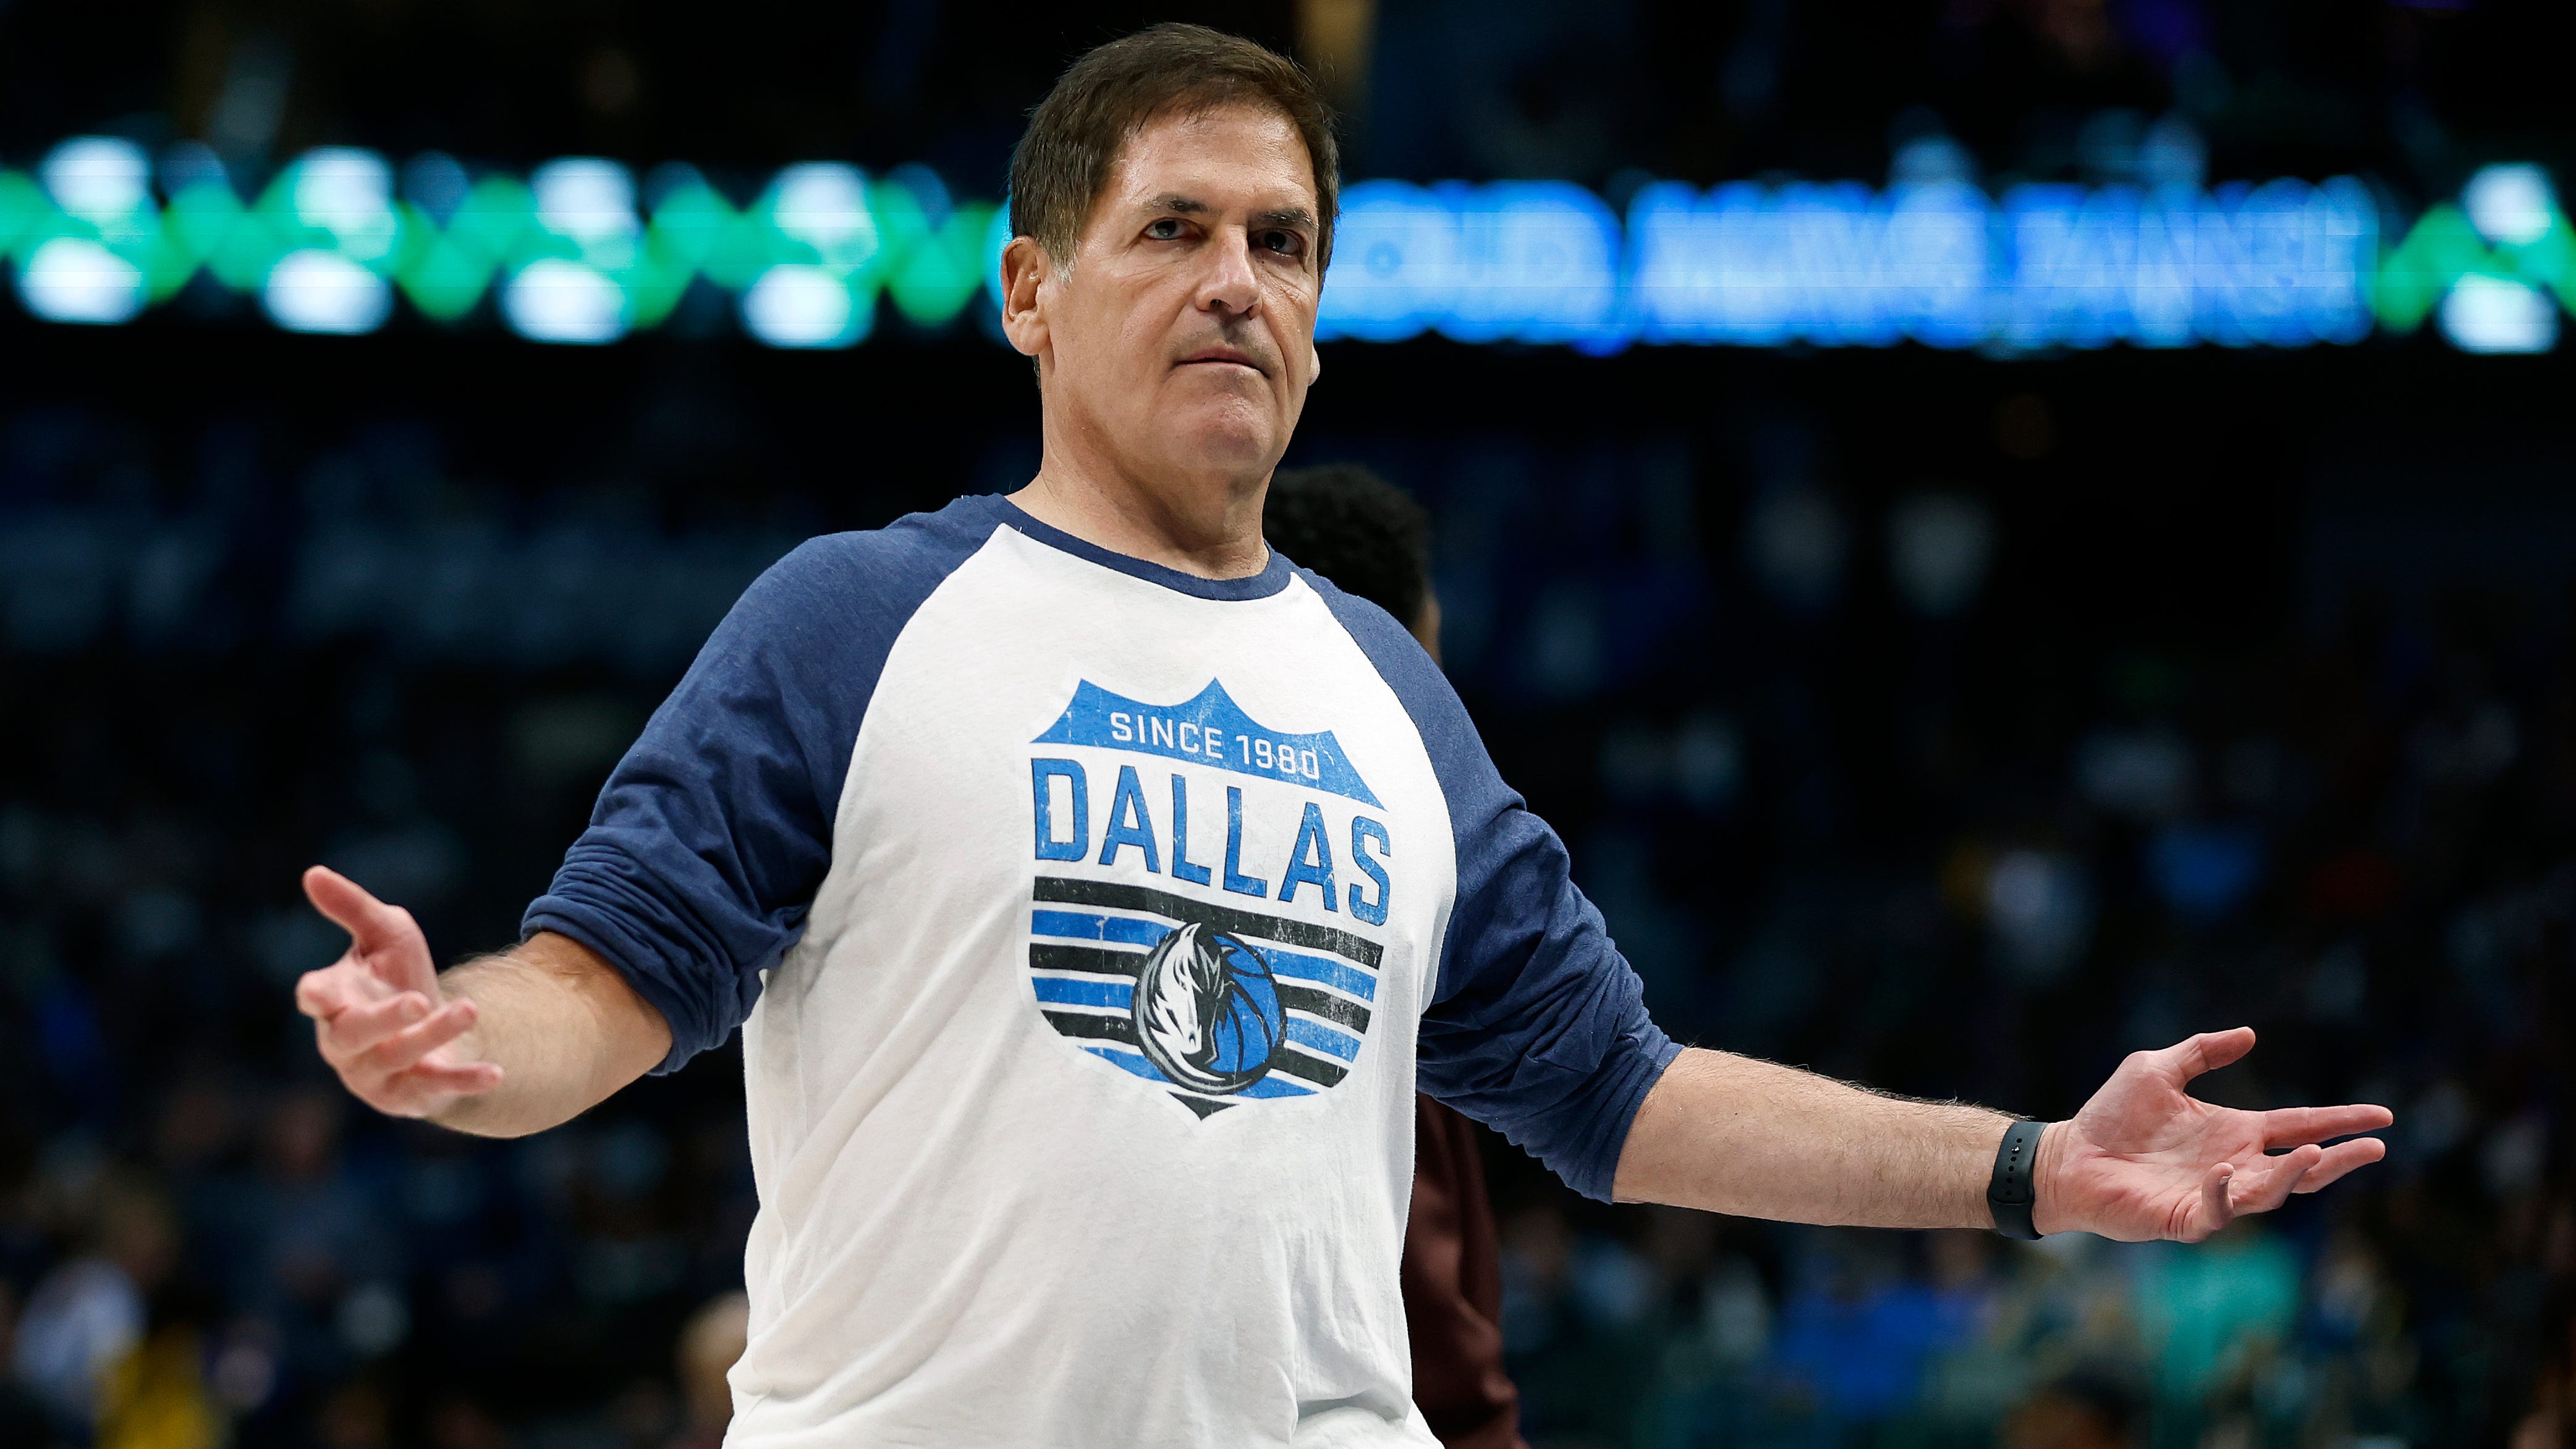 Dallas Mavericks owner Mark Cuban reacts during a timeout in Wednesday's game against the Golden State Warriors.